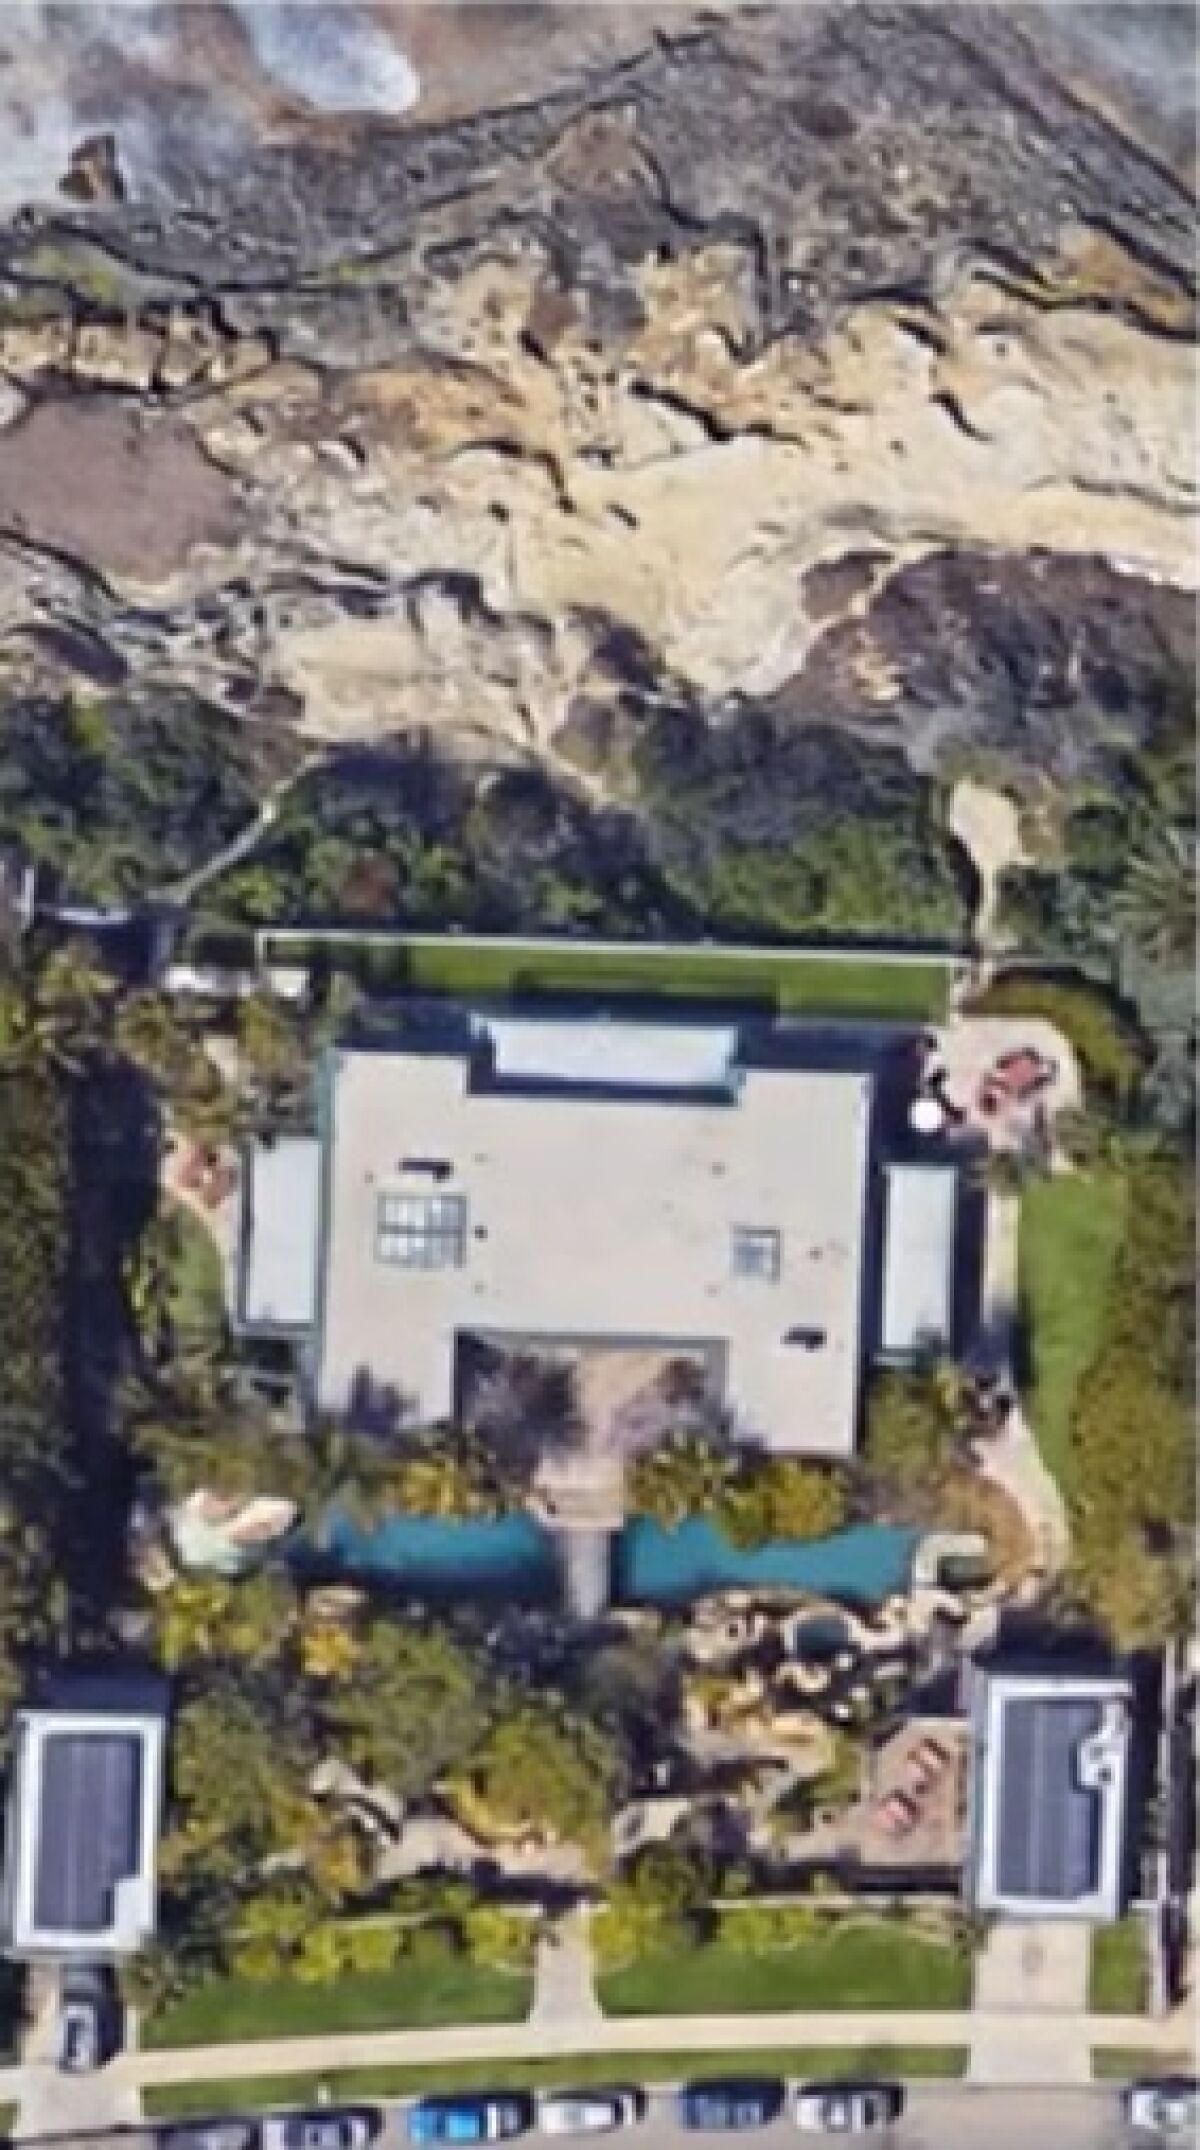 An overview of the property at 6340 Camino de la Costa, as presented to the California Coastal Commission.